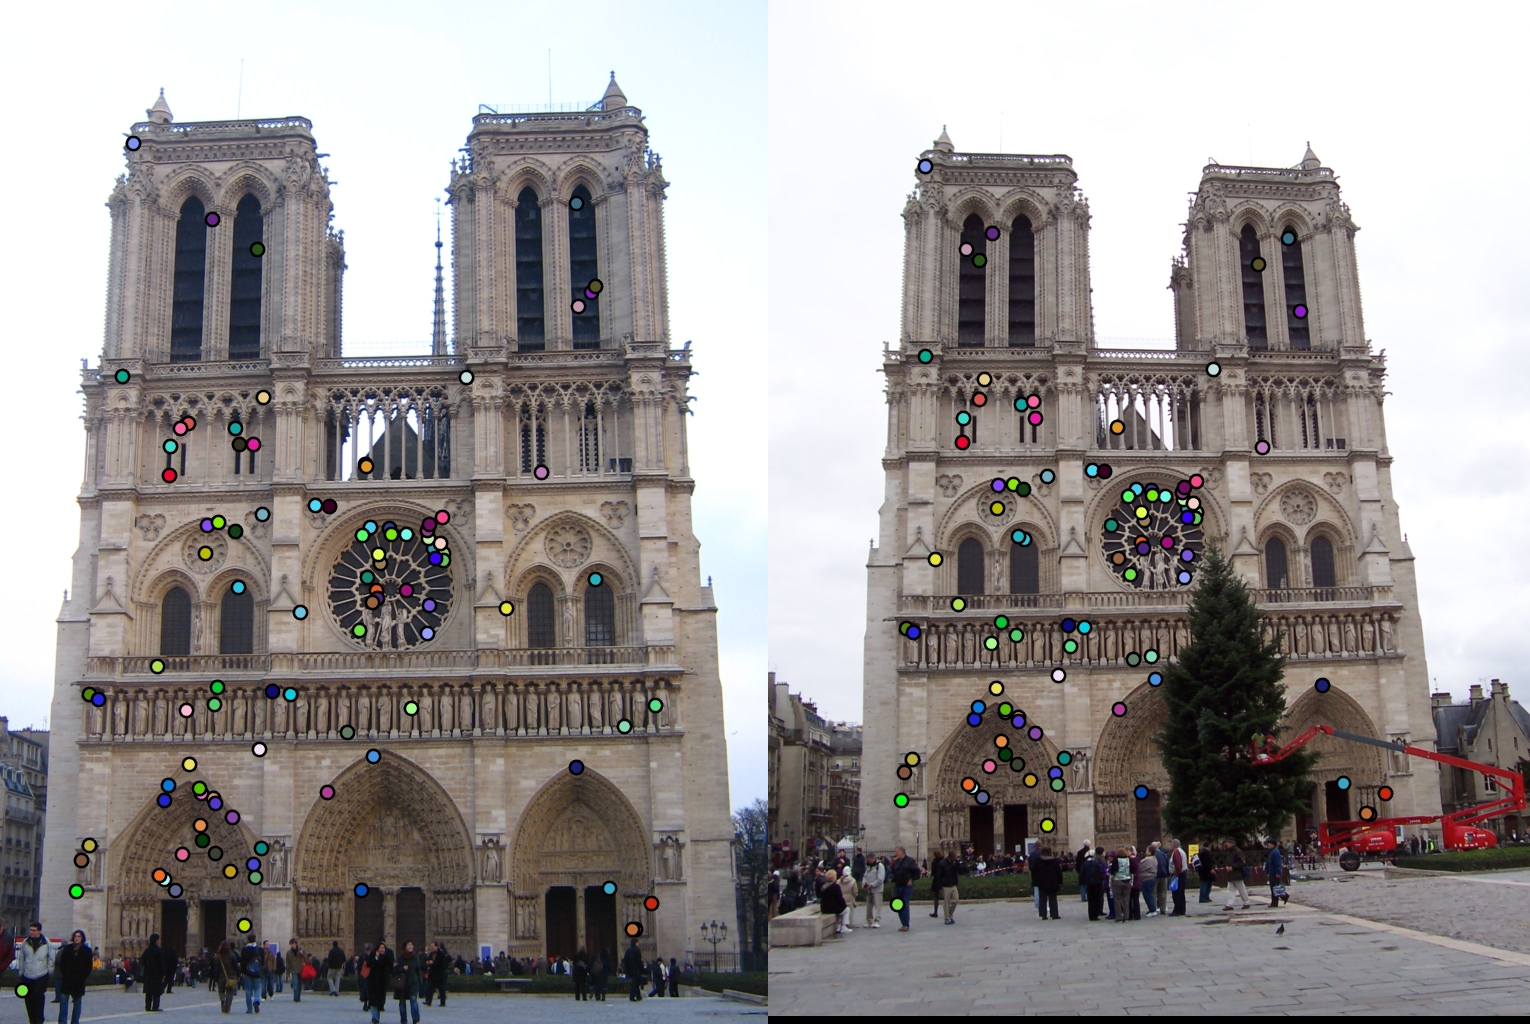 Interest Points on two images of Notre Dame